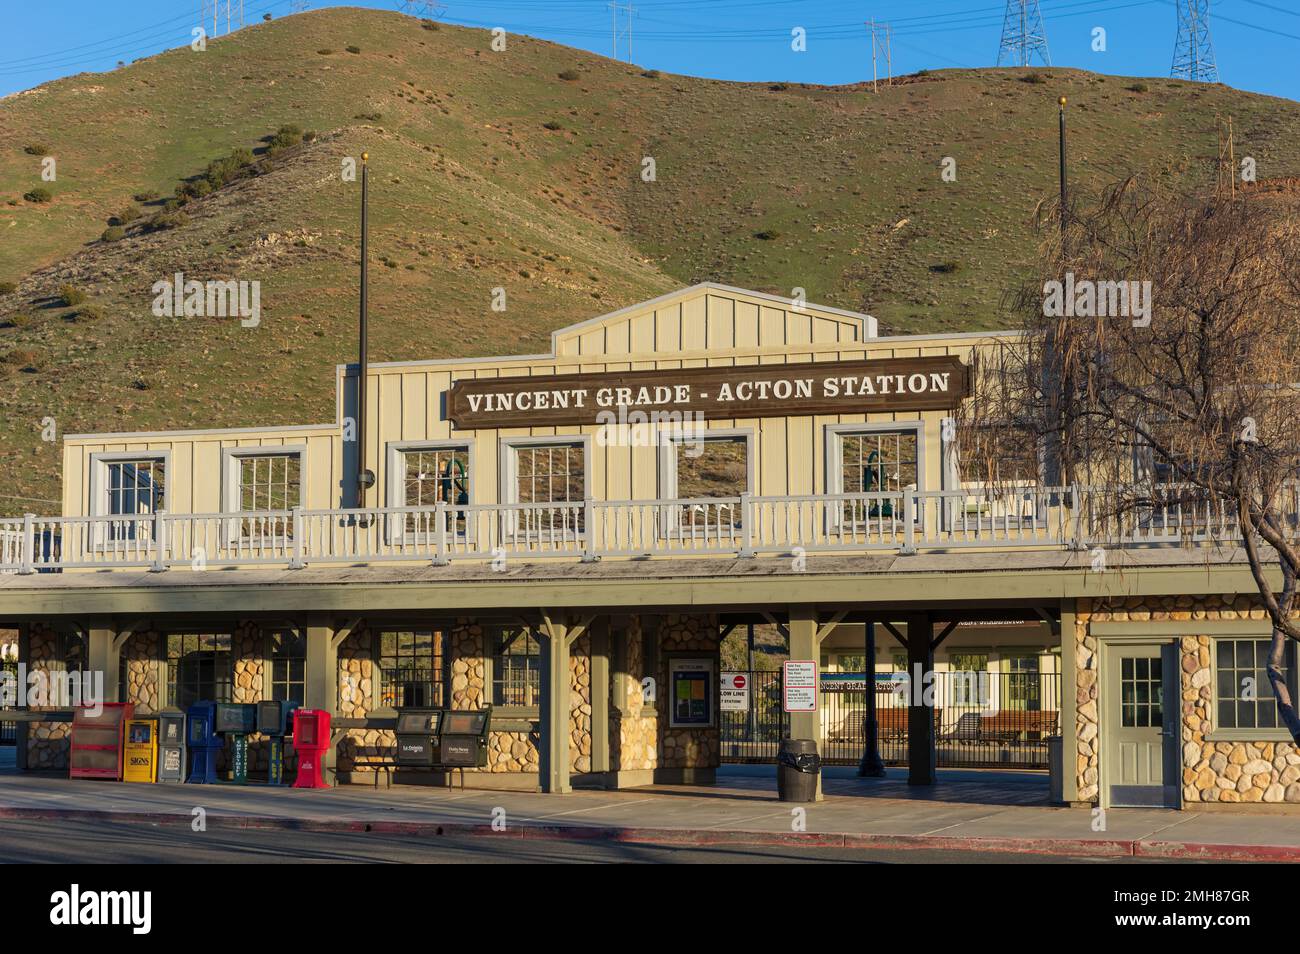 Acton, California, United States - January 17, 2023: Vincent Grade Acton Metrolink Station in Los Angeles County shown on a sunny day. Stock Photo